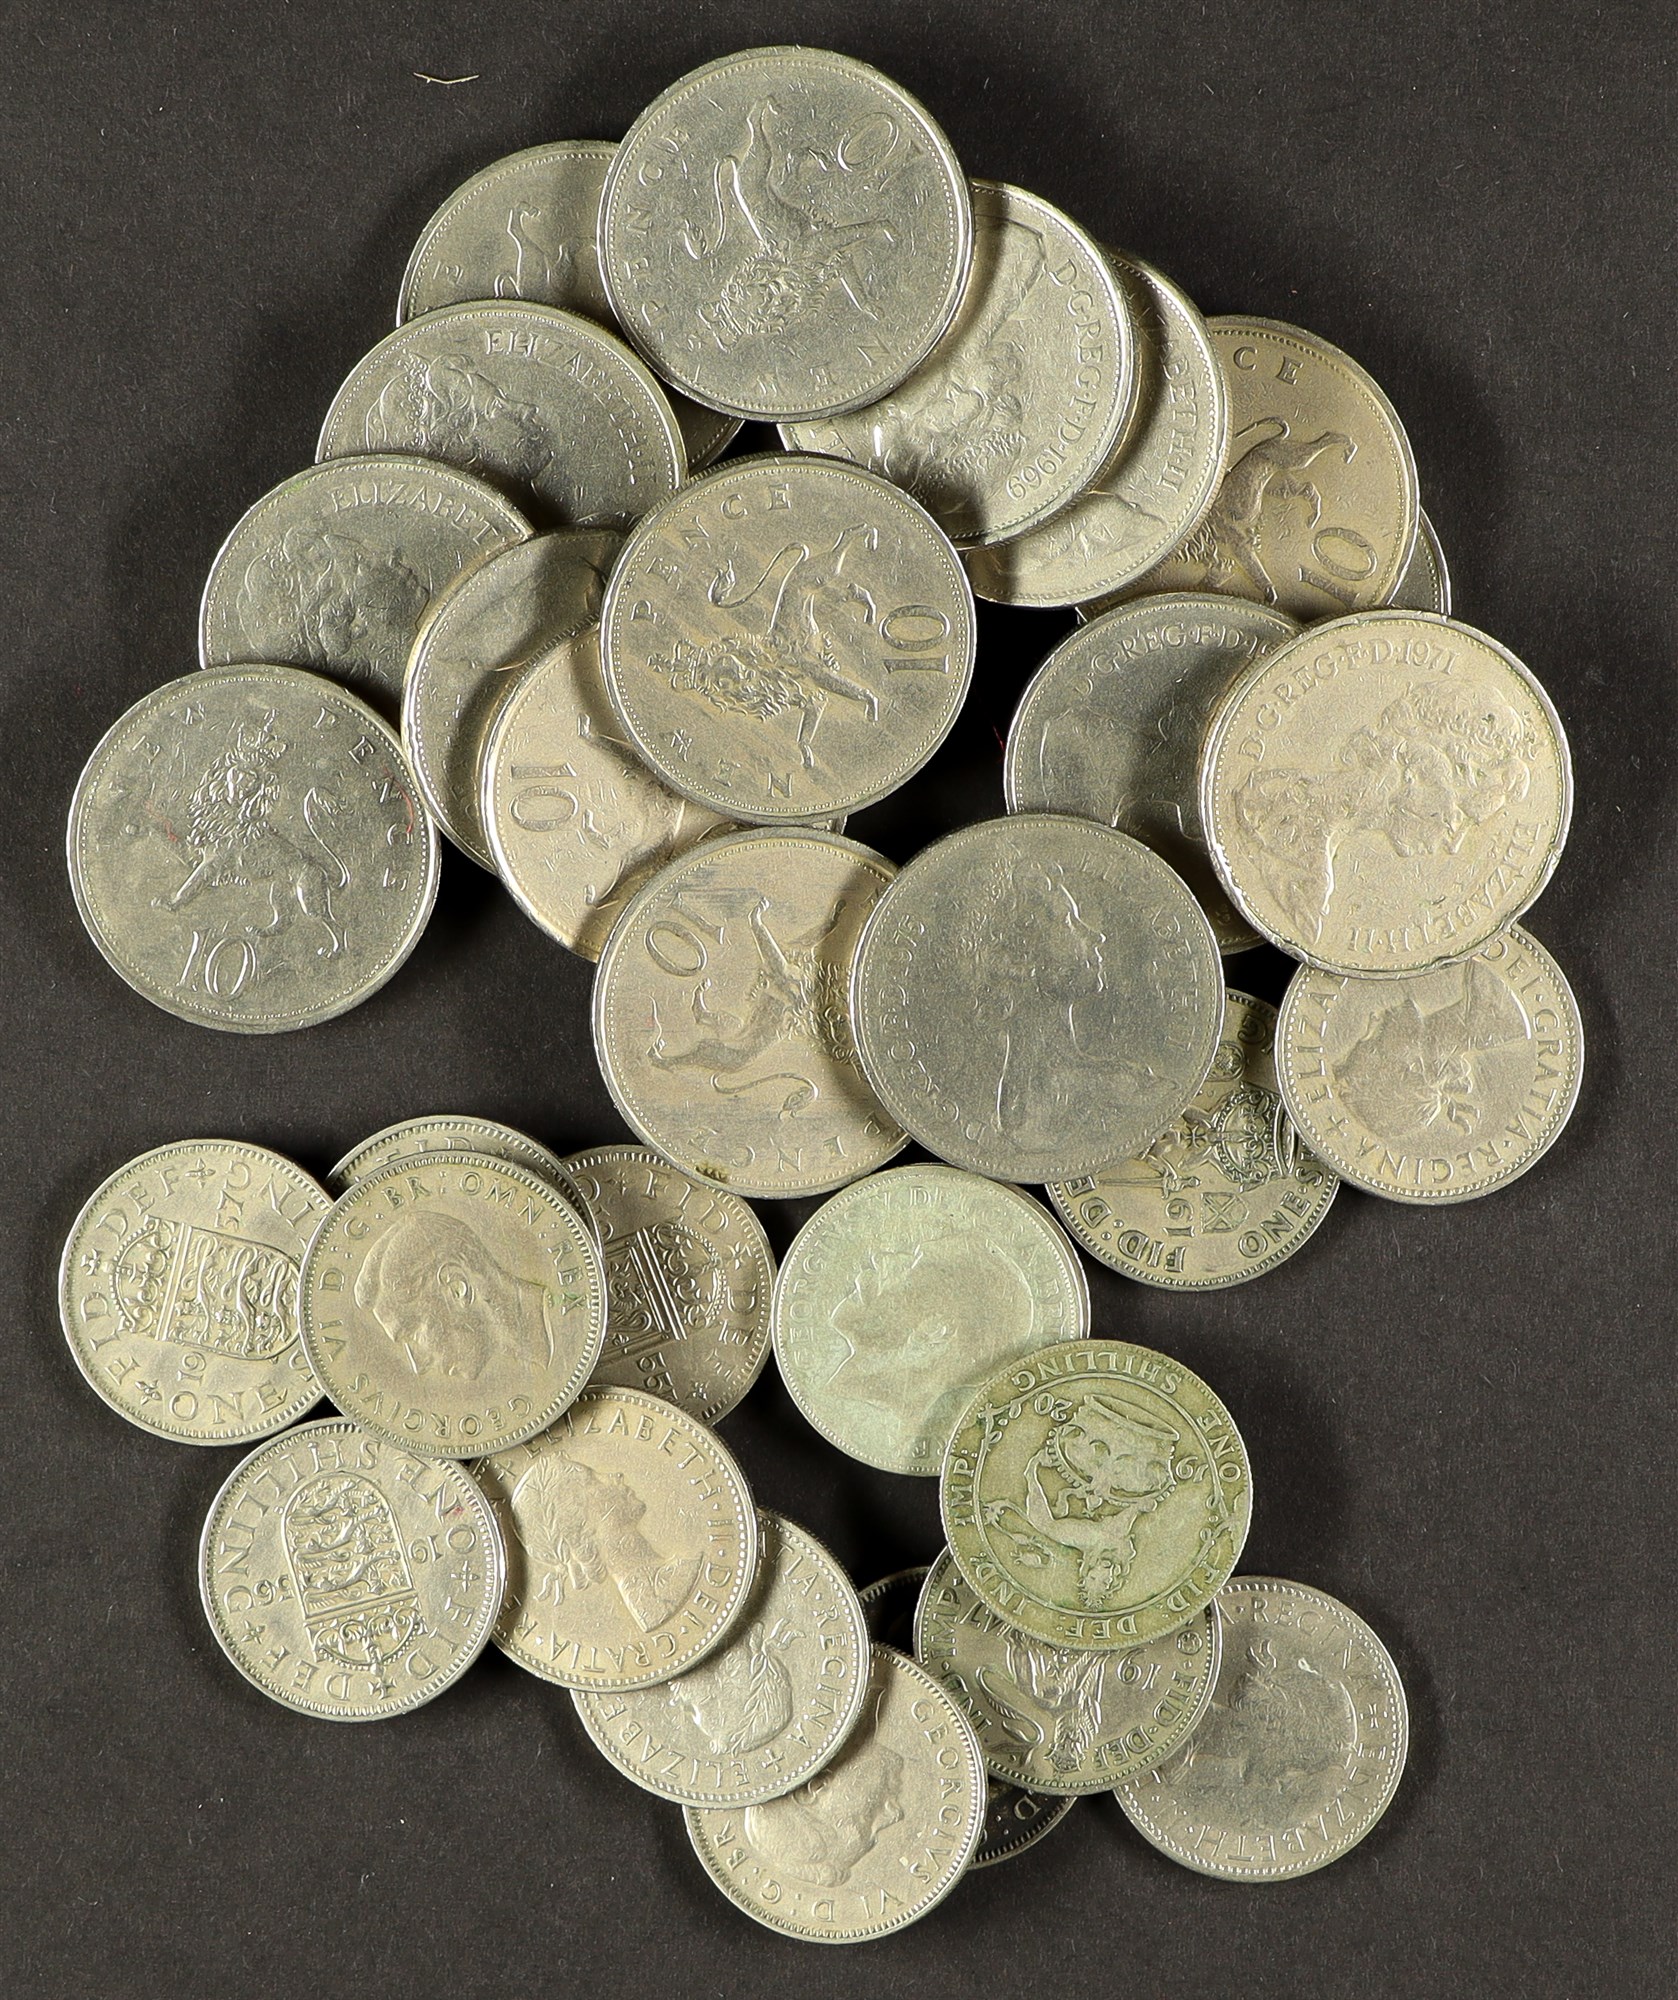 COINS an accumulation of British in bags in a shoebox, largely QE, but also some Kings, an 1887